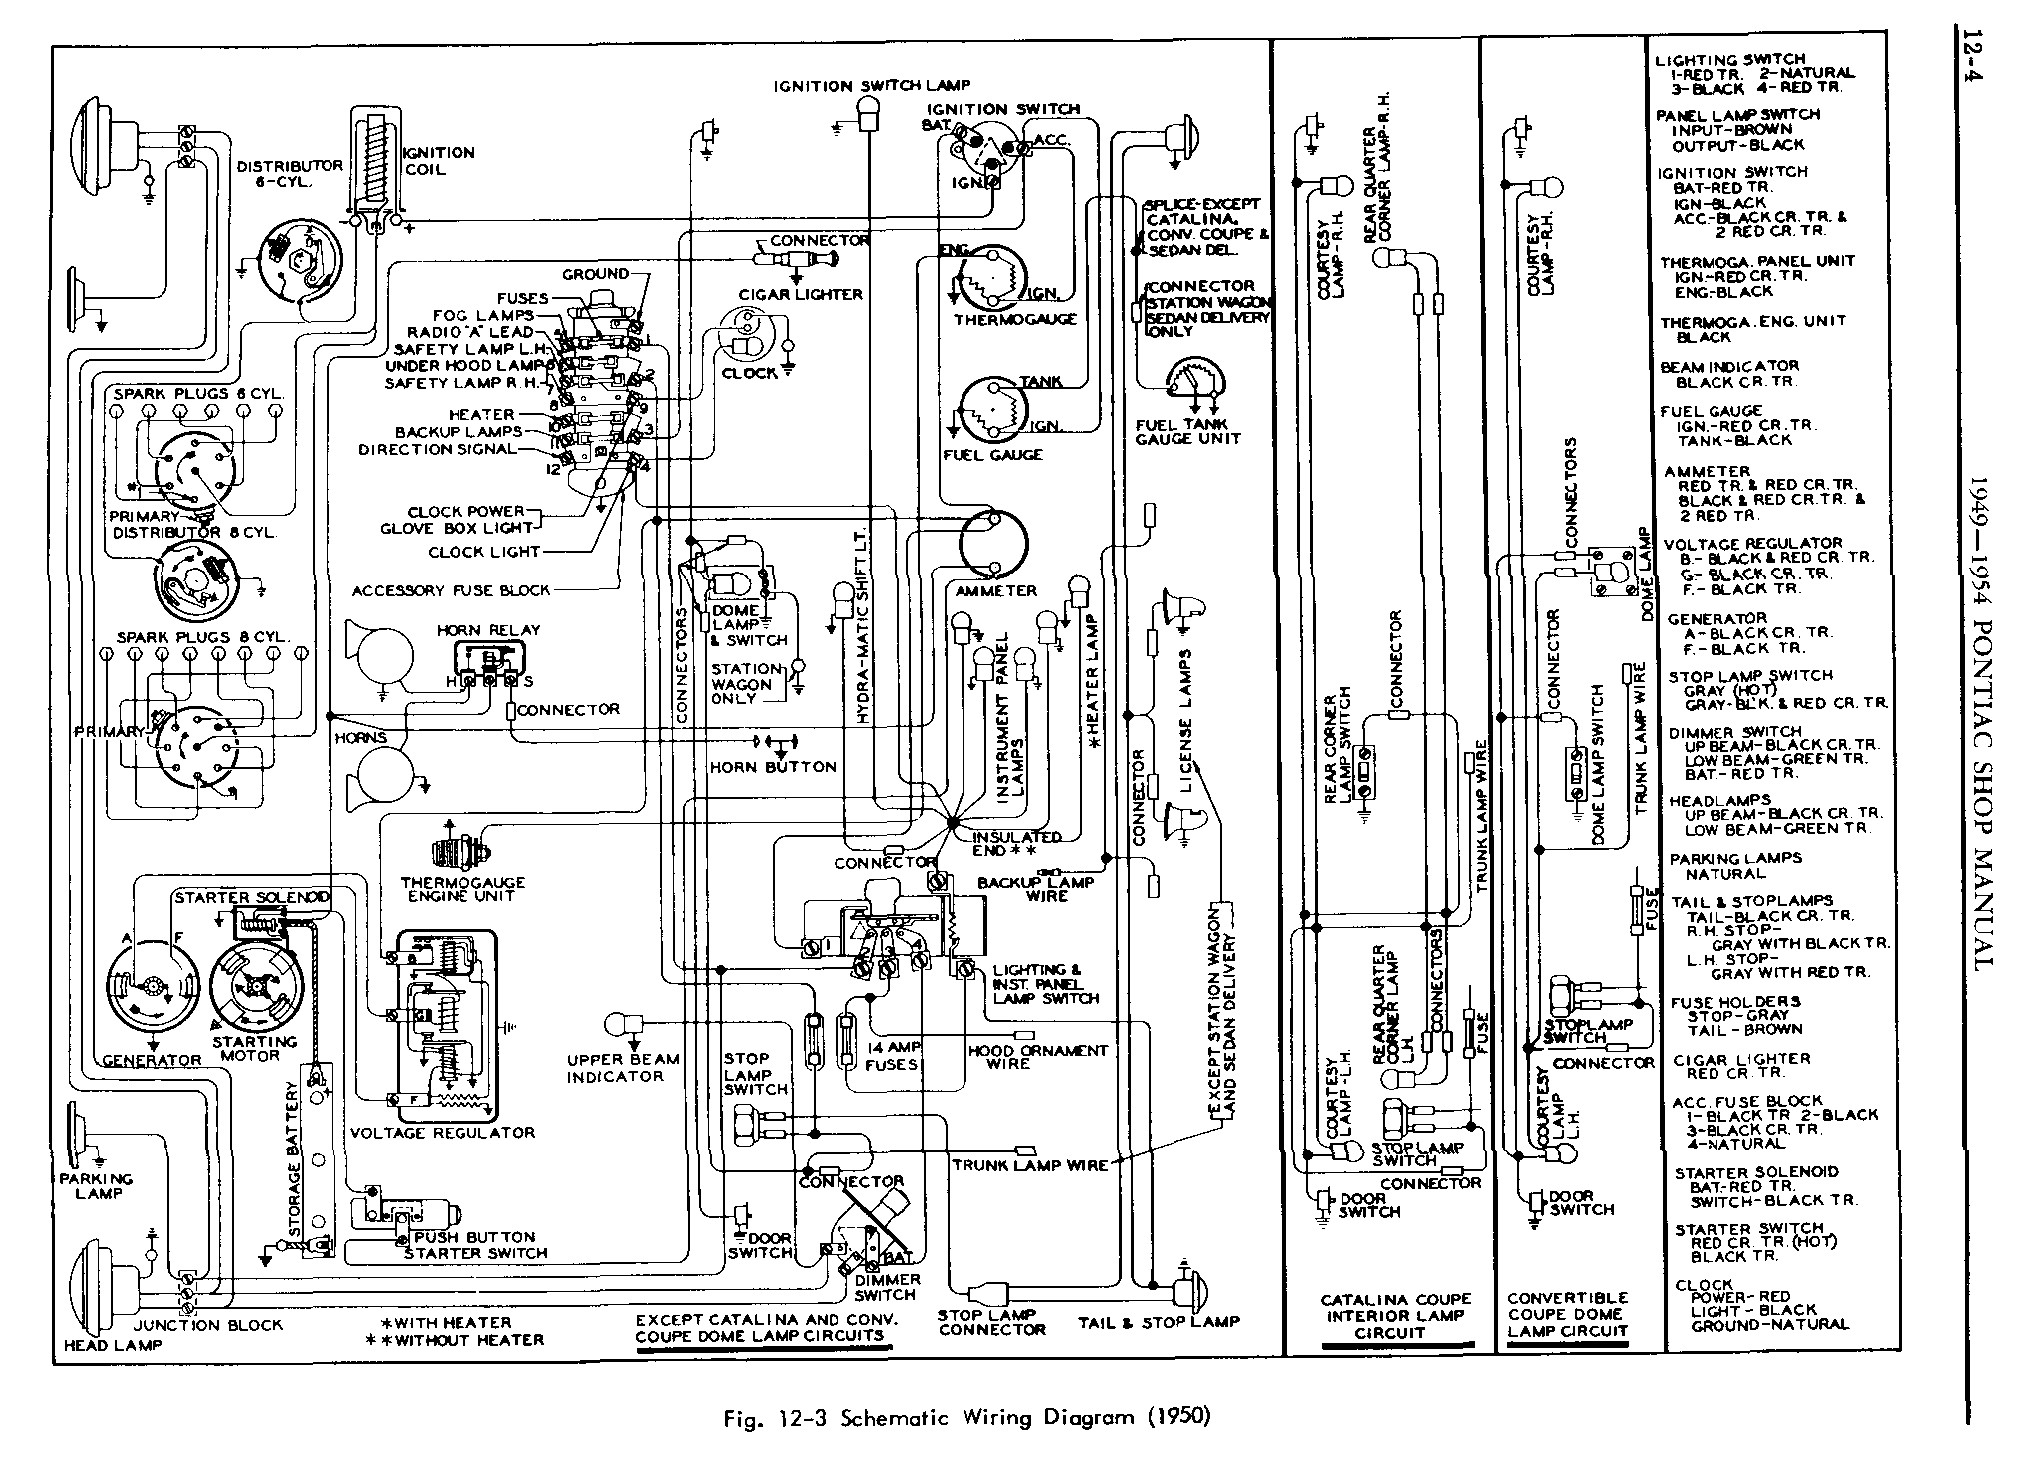 1949 Pontiac Shop Manual- Electrical and Instruments Page 4 of 54